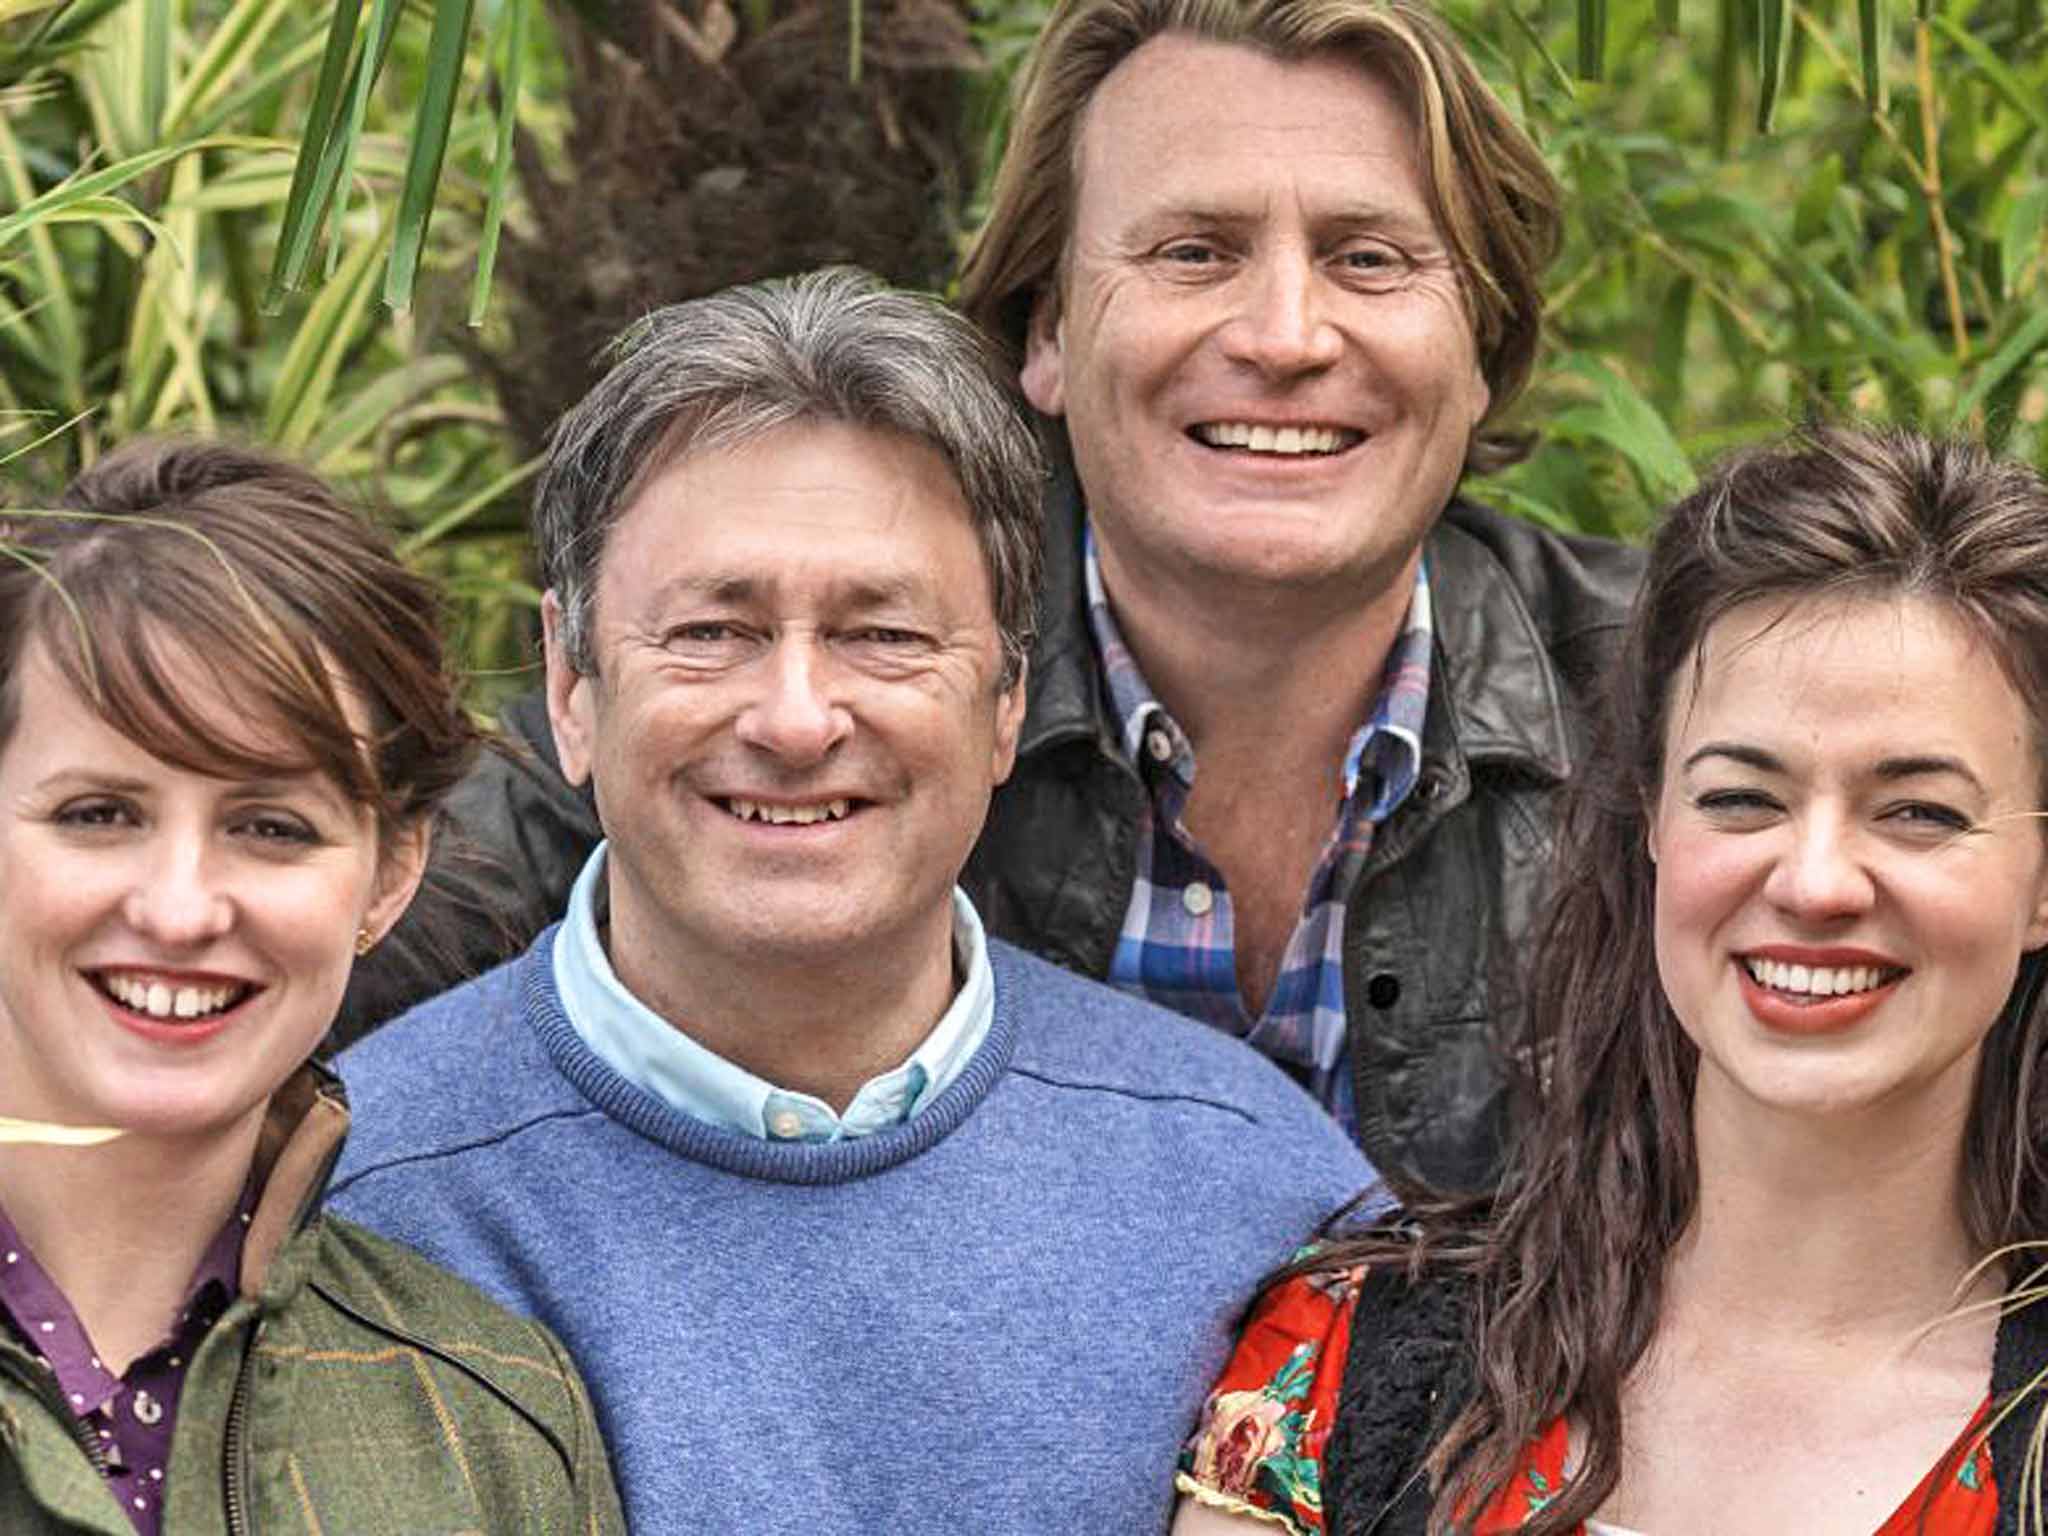 Rescue squad: Alan Titchmarsh with Katie Rushworth, David Domoney and Frances Tophill